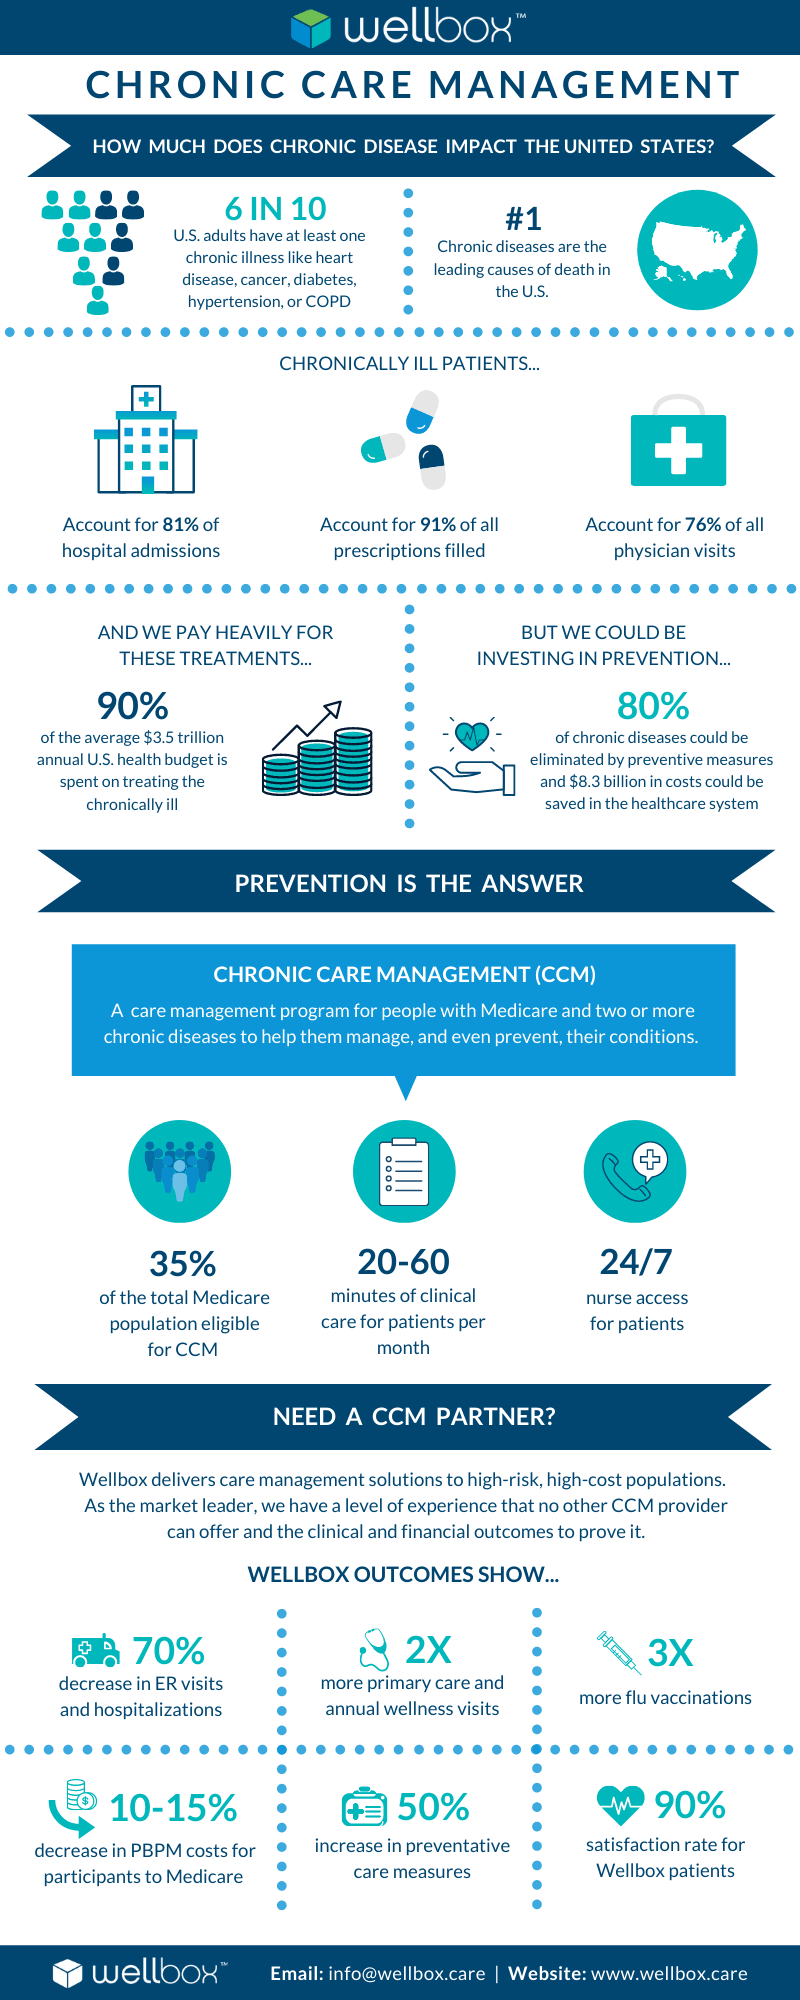 Discover 16 facts you should know about chronic care management and how partnering with the right provider can benefit both your practice and its patients.